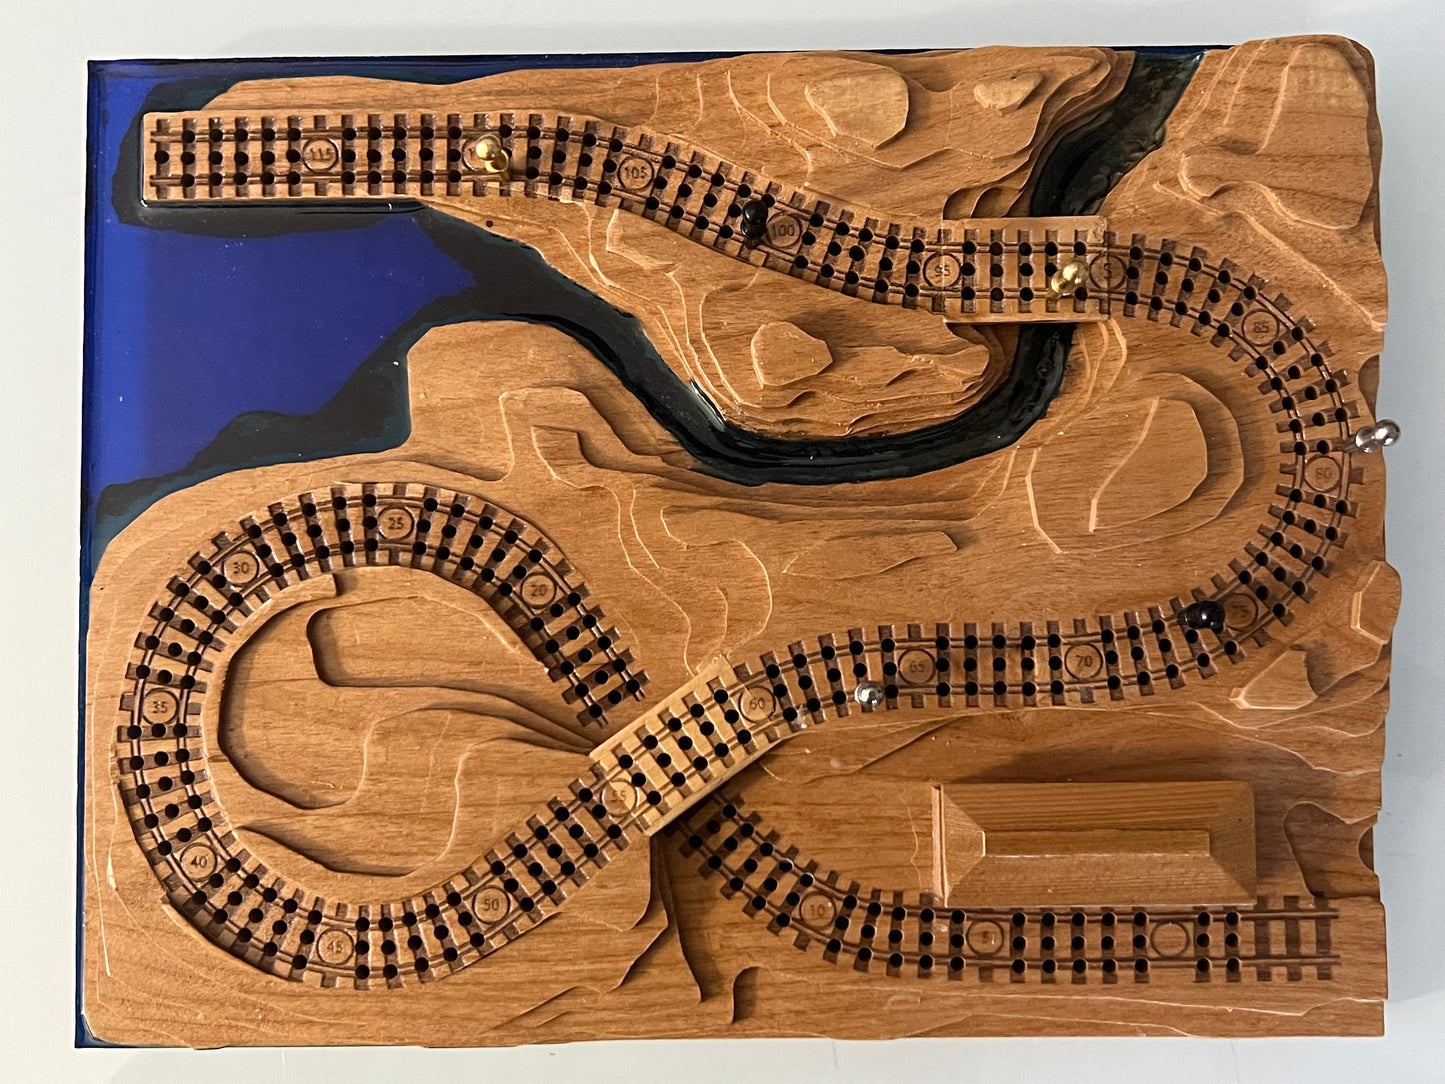 Special Prototype Resin & Alder 'From the Mountains to the Coast' Railroad Cribscape